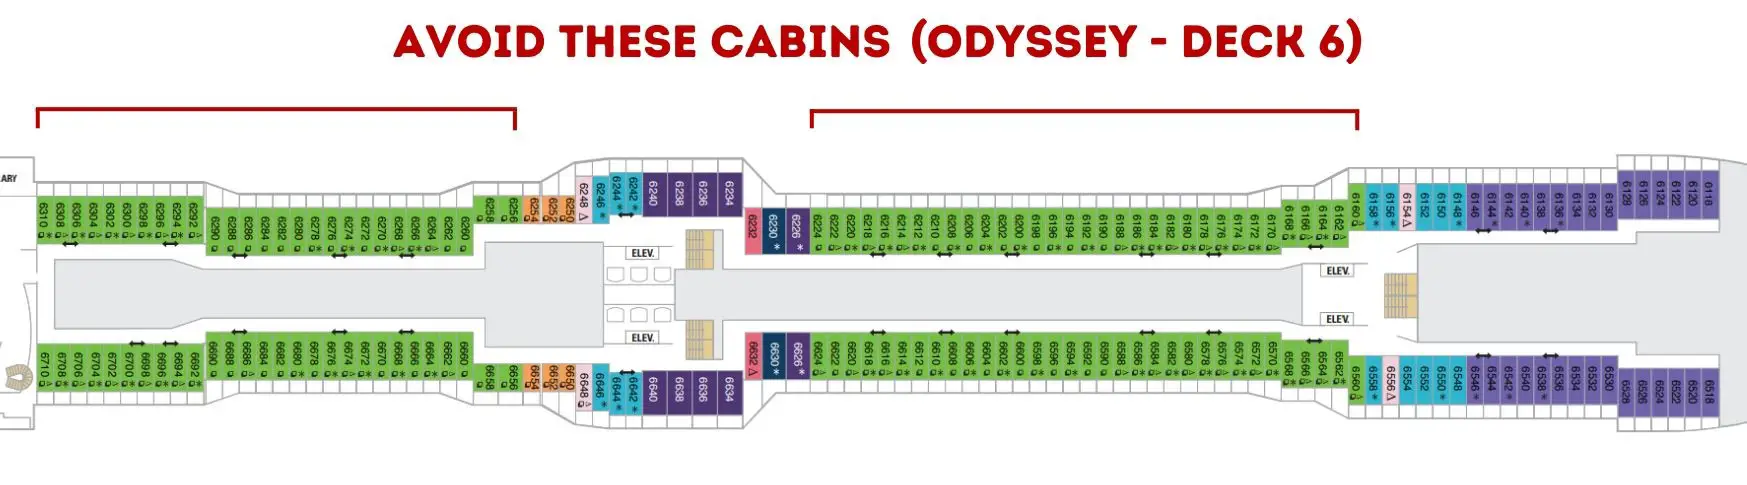 cabins to avoid on deck 6 of odyssey of the seas